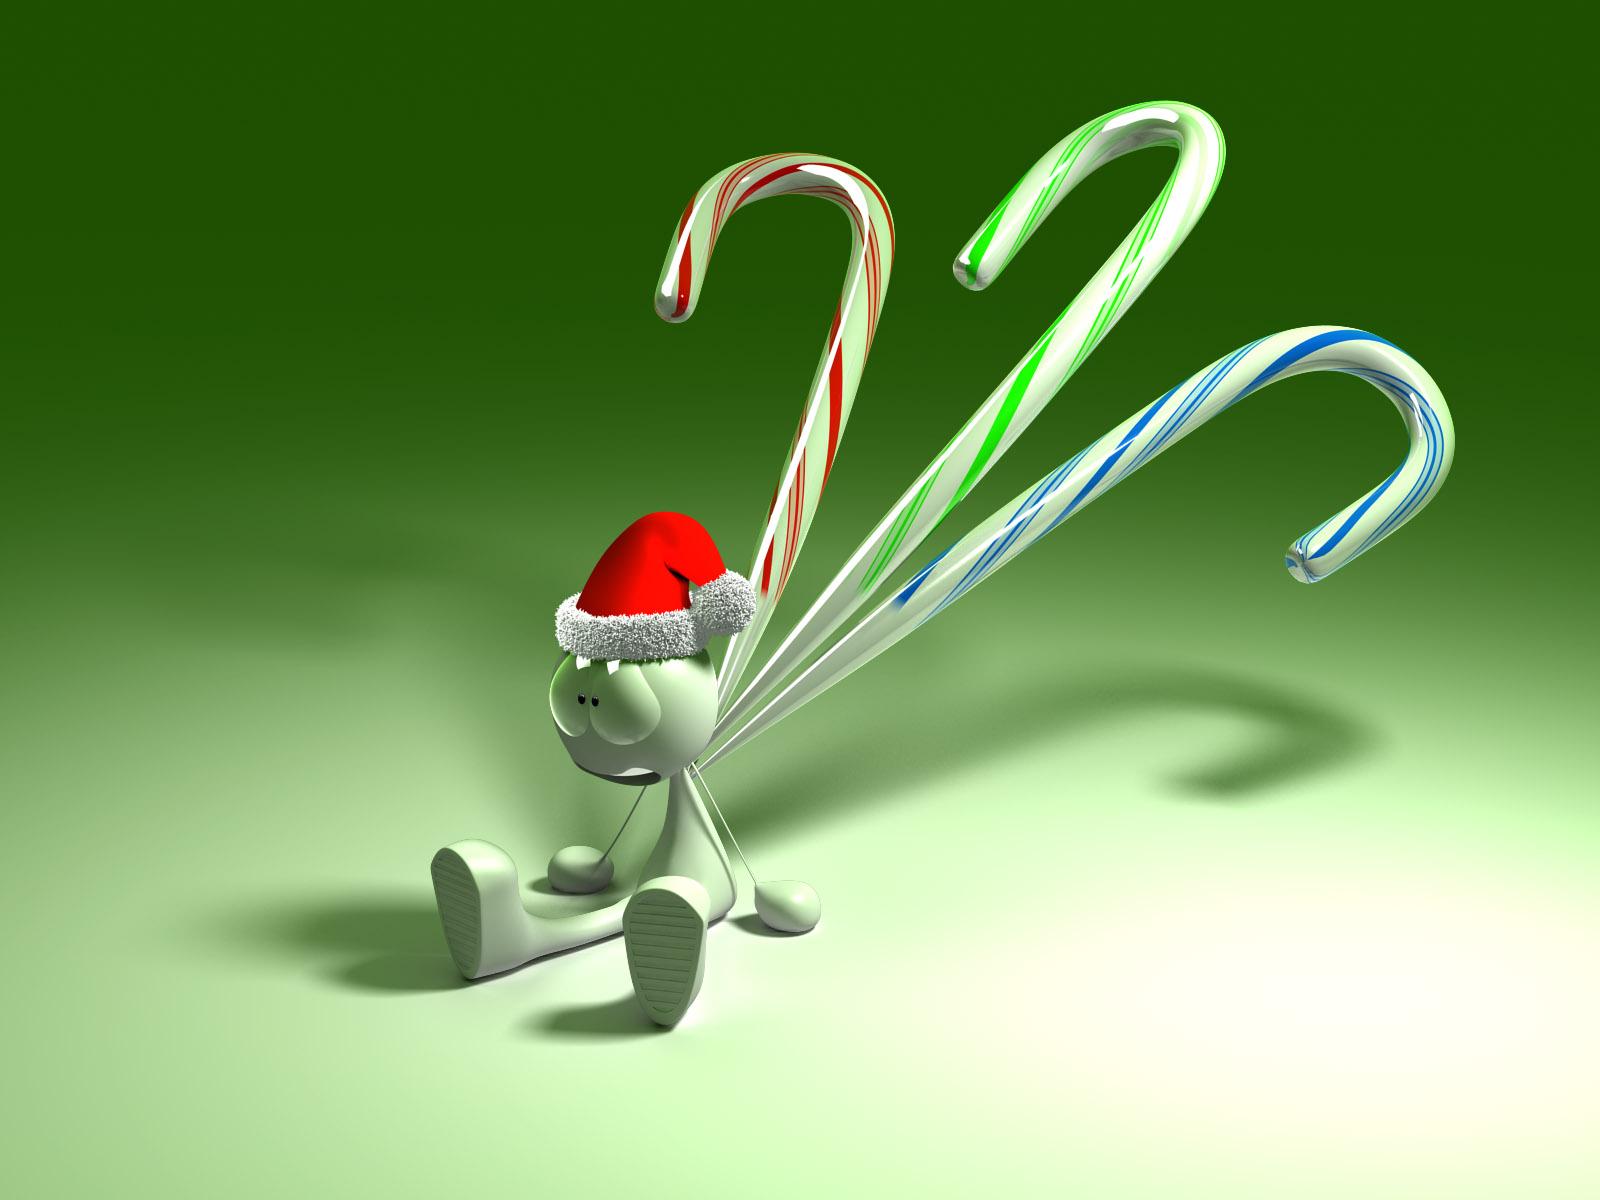 Candy Cane Backgrounds